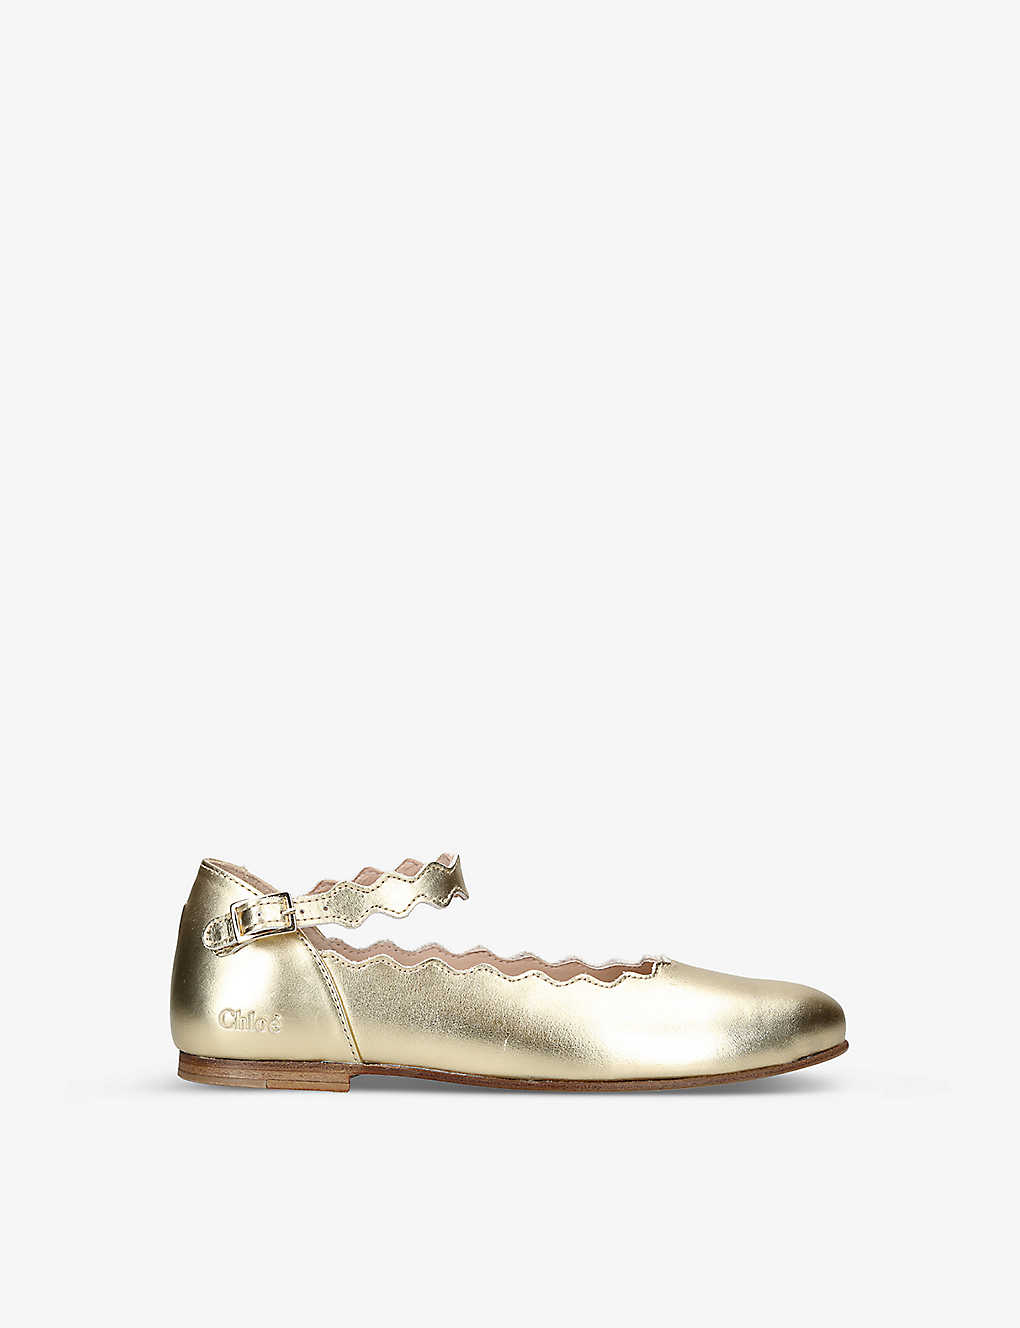 CHLOÉ CHLOE GIRLS GOLD KIDS SCALLOP-TRIM LOGO-EMBOSSED LEATHER BALLERINA SHOES 6-9 YEARS,64196764